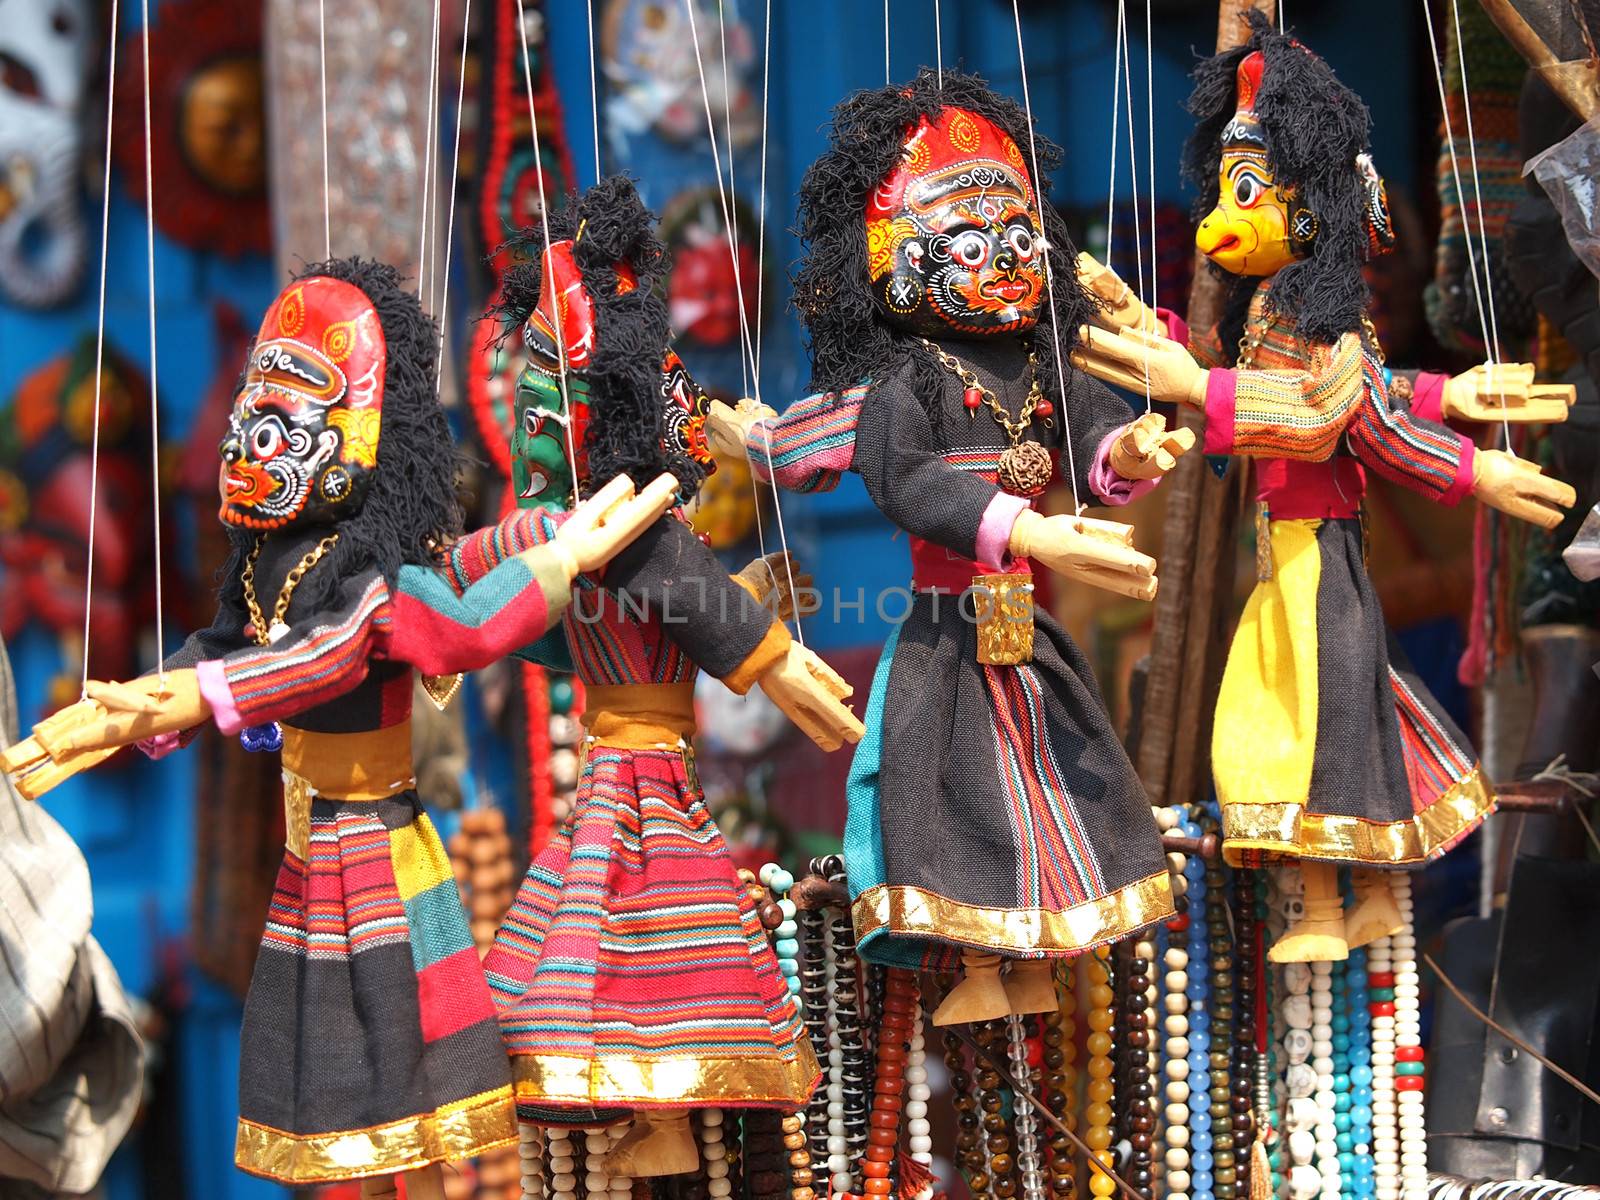 traditional puppets on open market in Nepal       